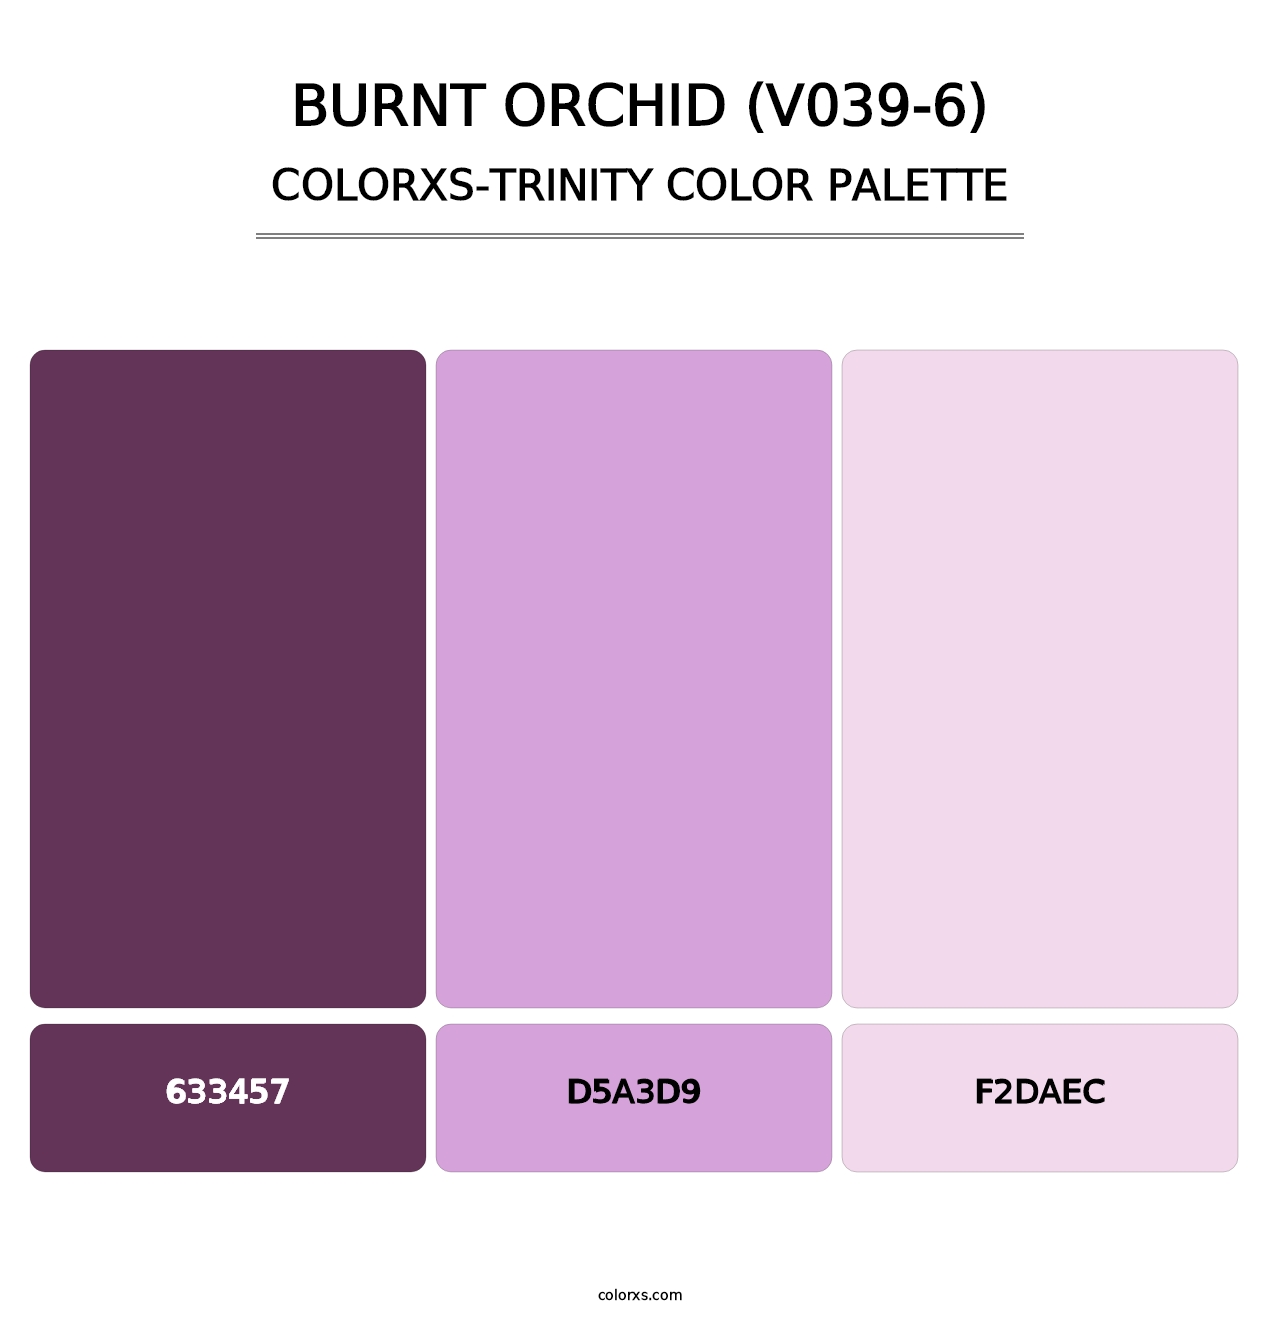 Burnt Orchid (V039-6) - Colorxs Trinity Palette